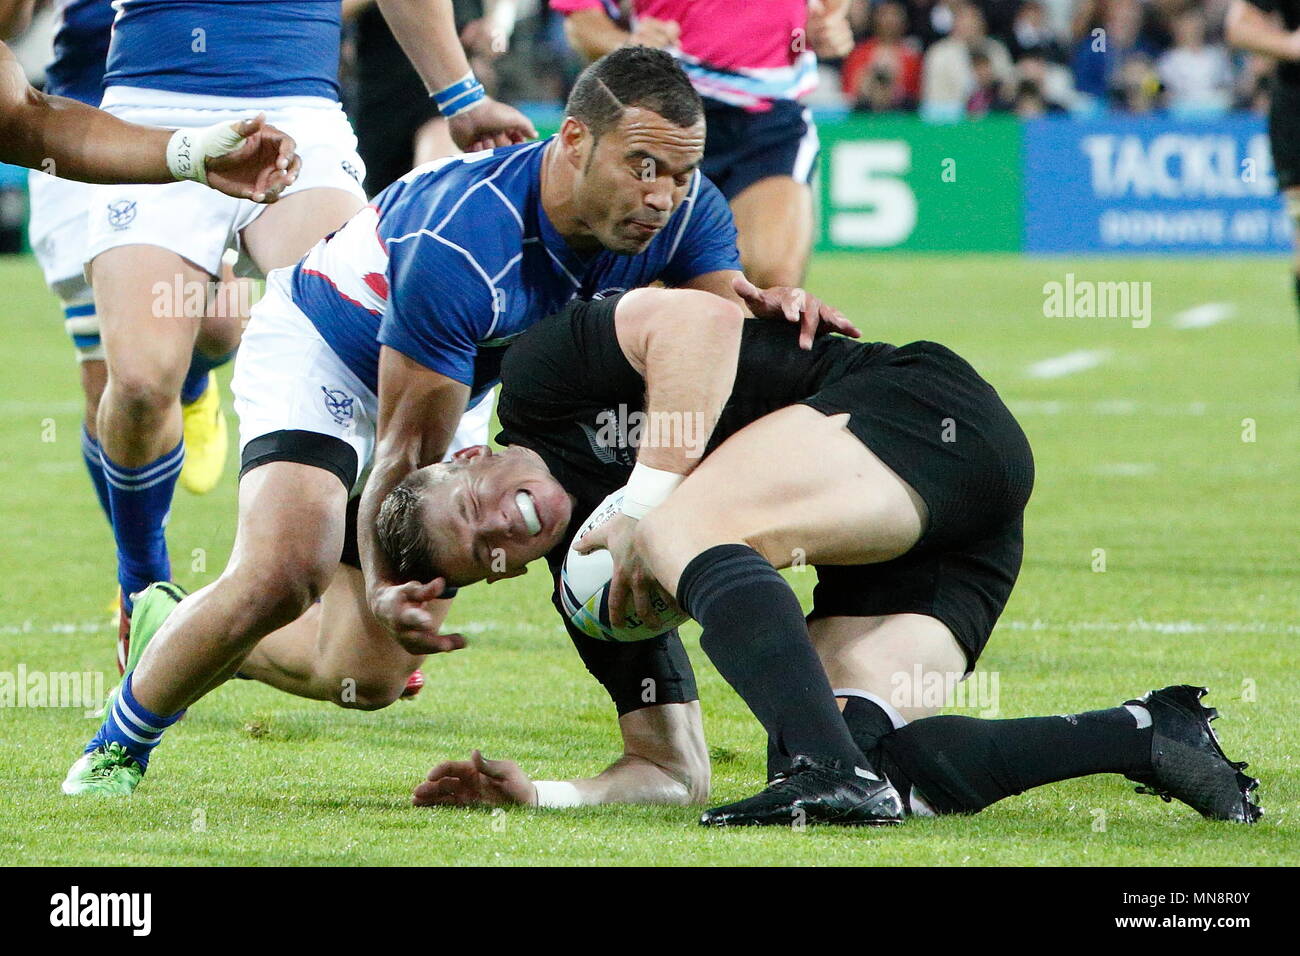 Colin Slade of NZL All Blacks slips and allows David Philander of Namibia to pounce during the IRB RWC 2015 match between New Zealand All Blacks v Namibia- Pool C Match 12 at The Stadium, Queen Elizabeth Olympic Park. London, England. 24 September 2015 Stock Photo